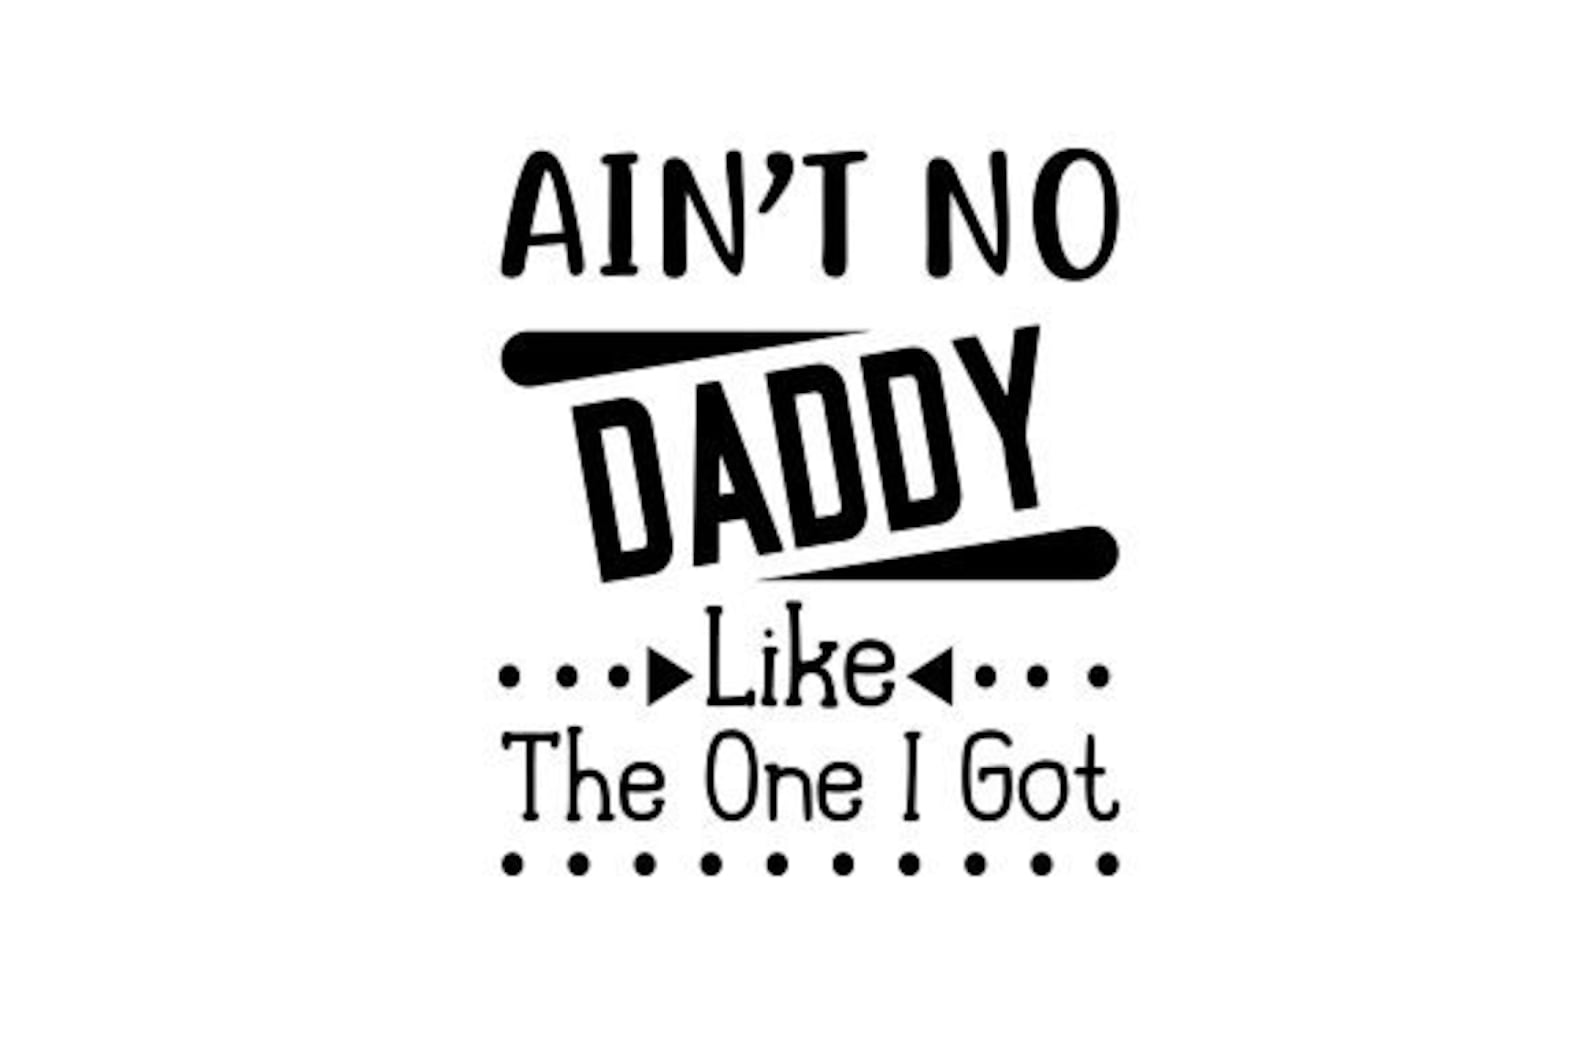 svg Ain't No Daddy Like the One I Got DXF PNG jpg cut image 0.